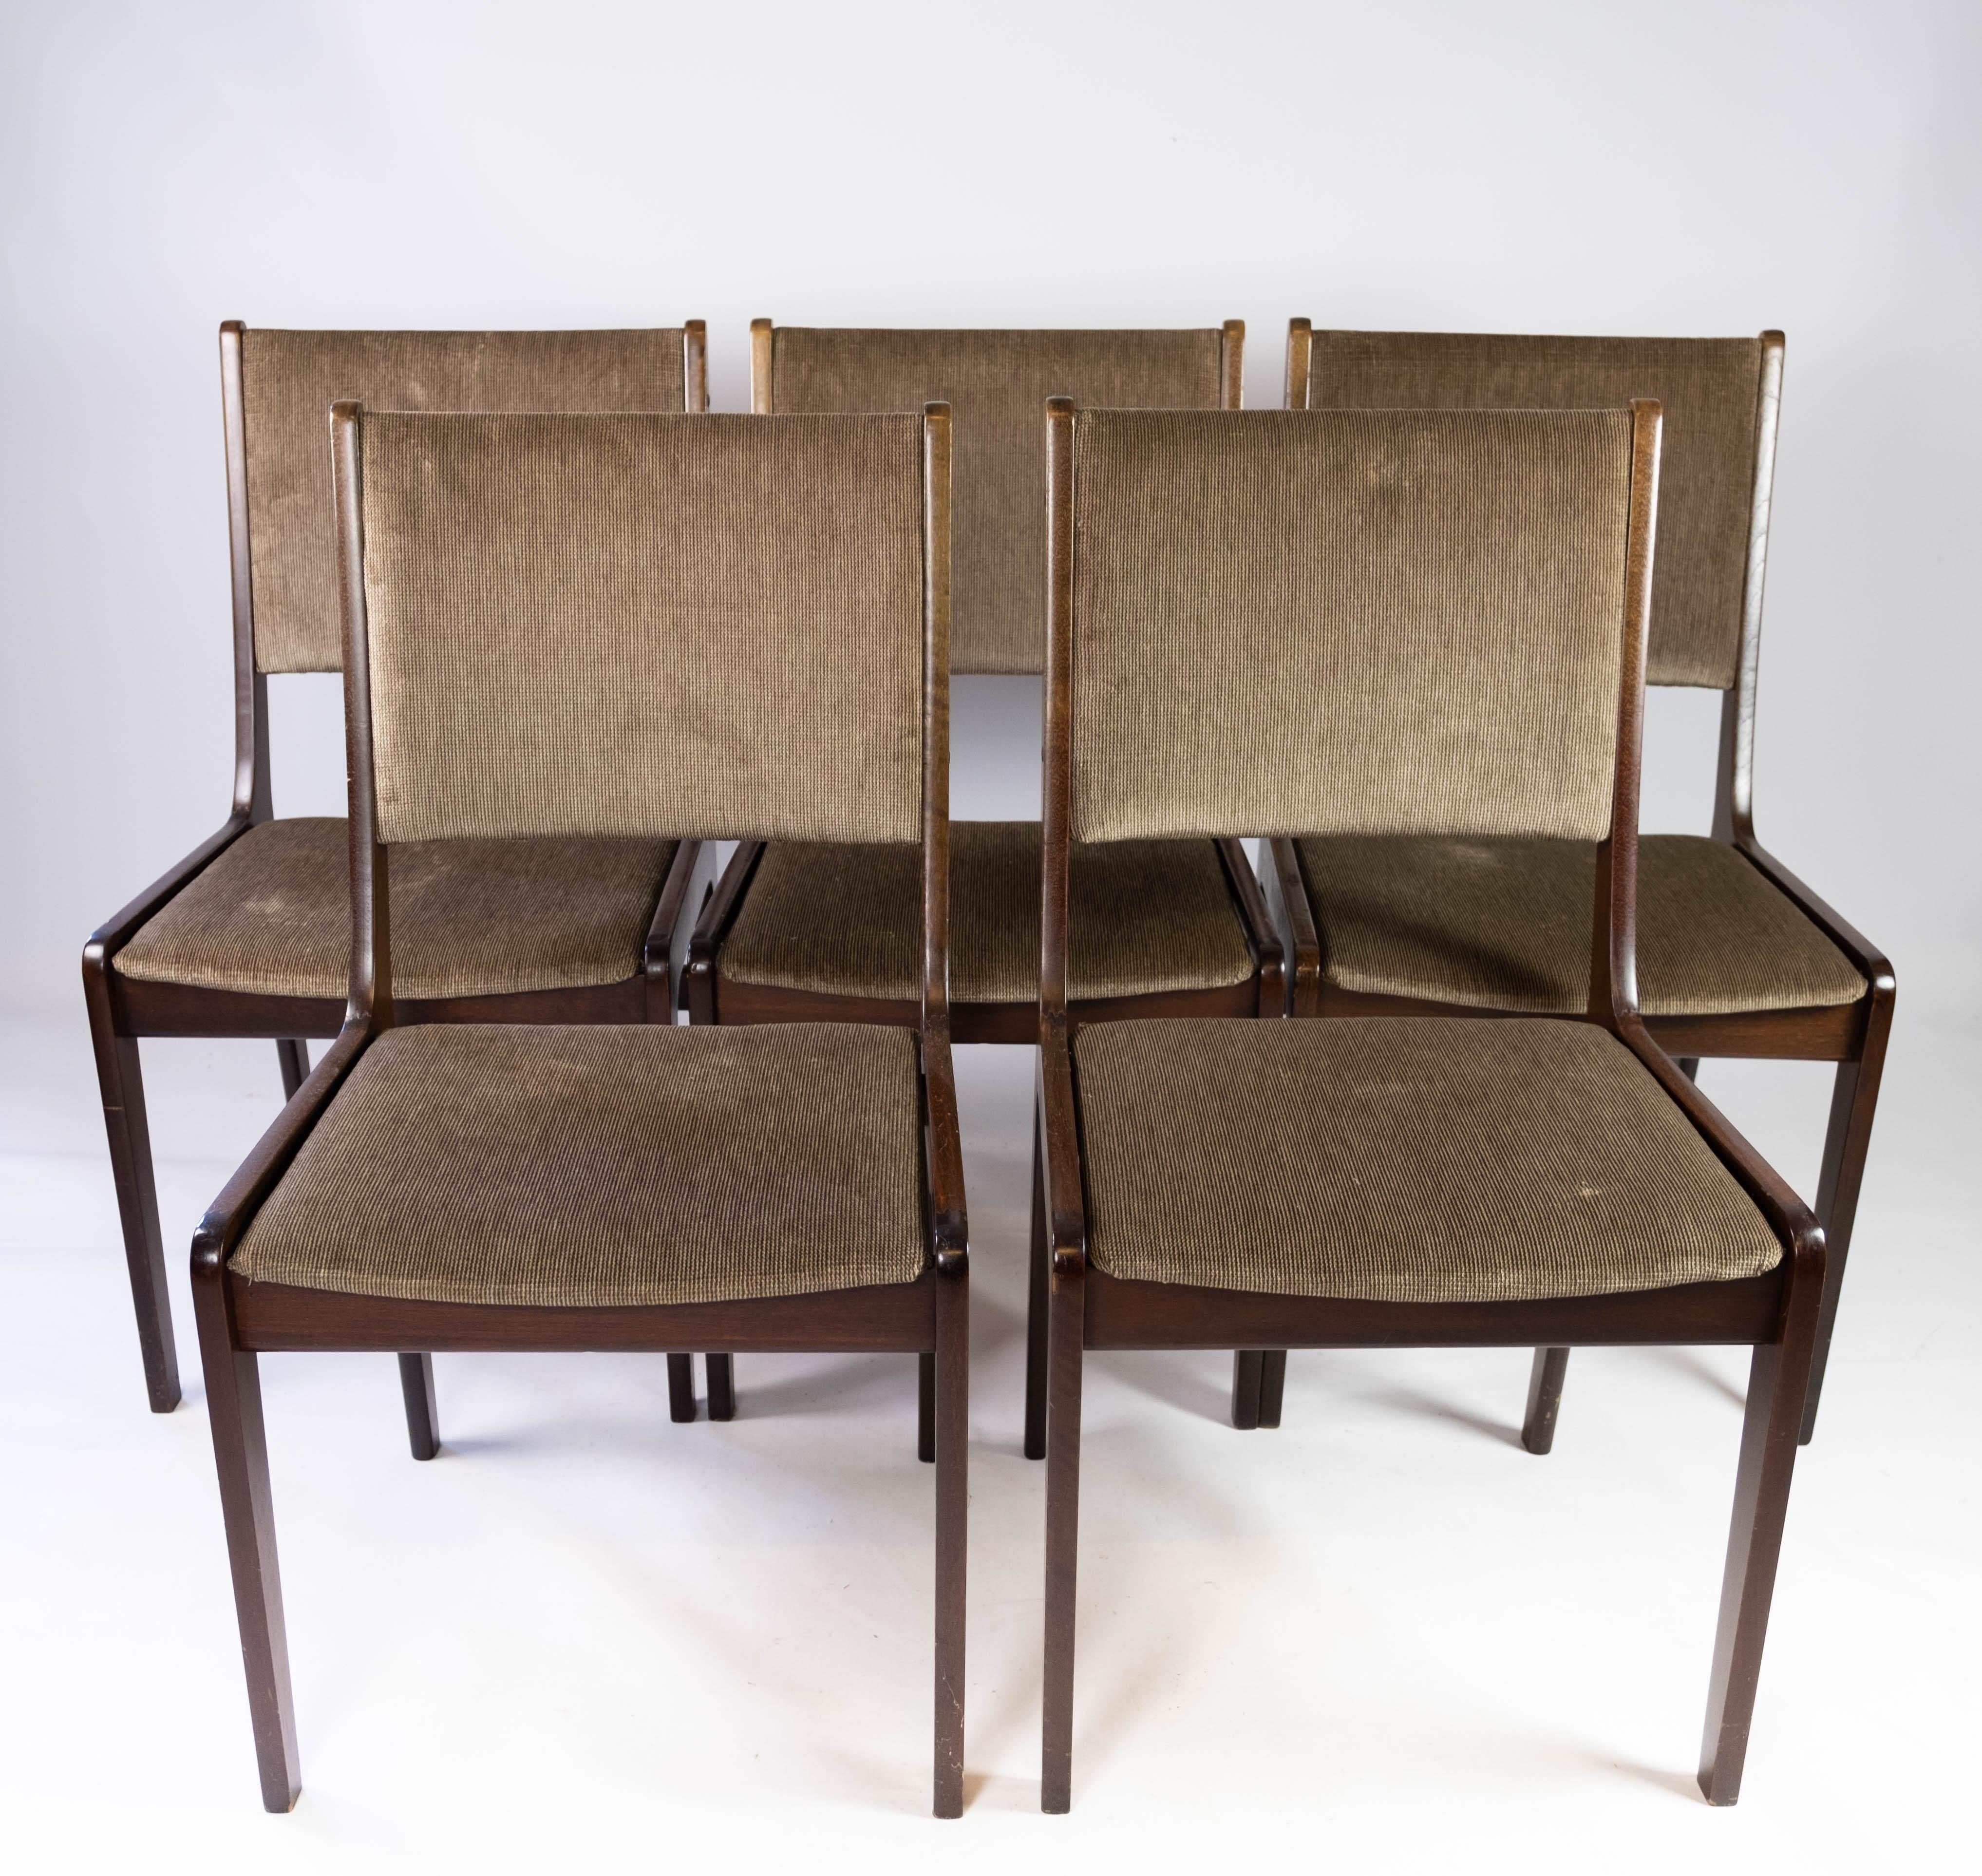 Set of Four Dining Room Chairs in Dark Wood of Danish Design by Faarstrup, 1960s In Good Condition For Sale In Lejre, DK